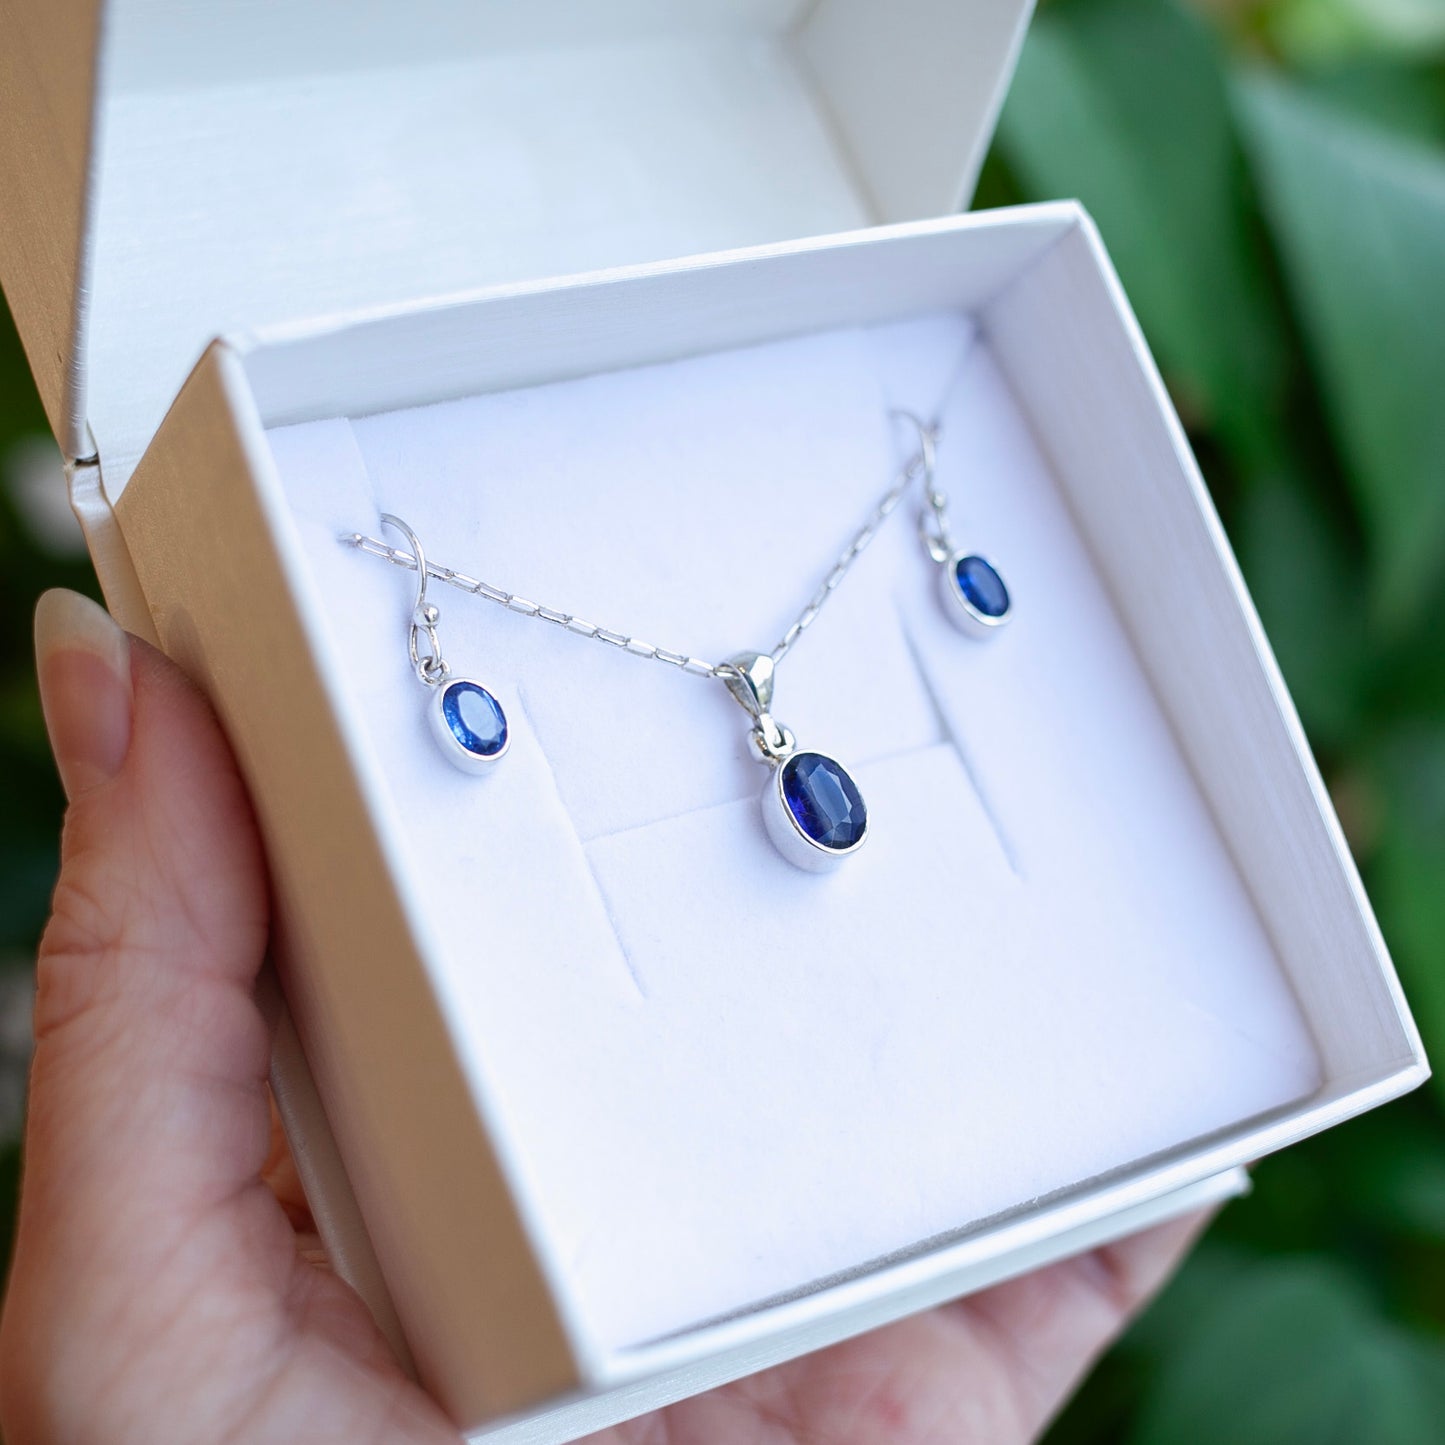 Kyanite Necklace and Earrings Set